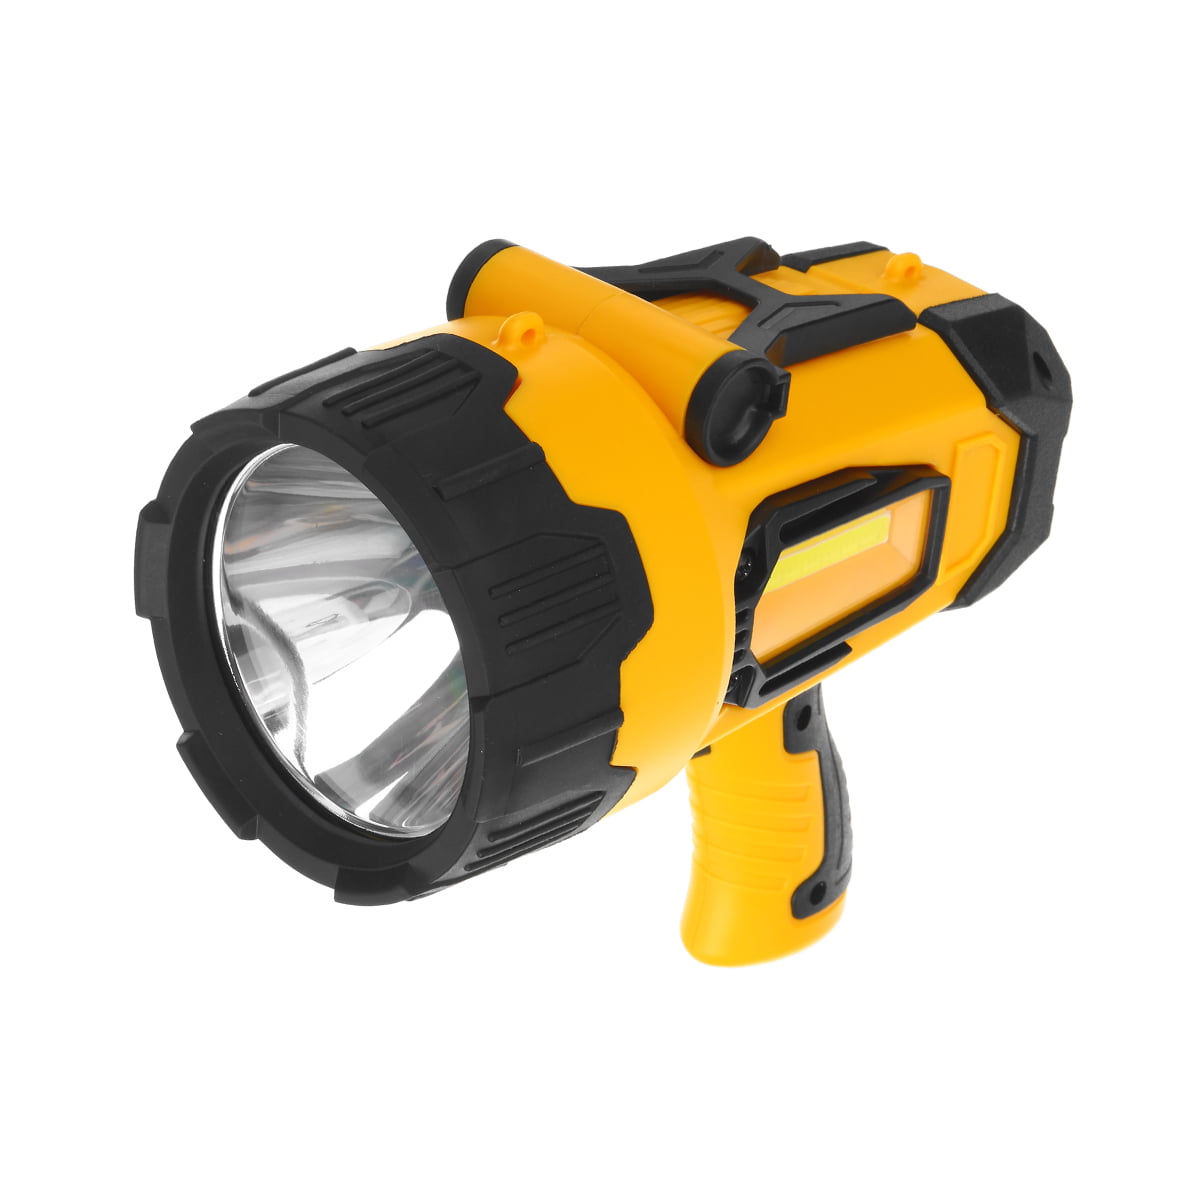 37 LED RECHARGEABLE LANTERN WORK LIGHT TORCH 1 MILLION CANDLE POWER SPOTLIGHT 